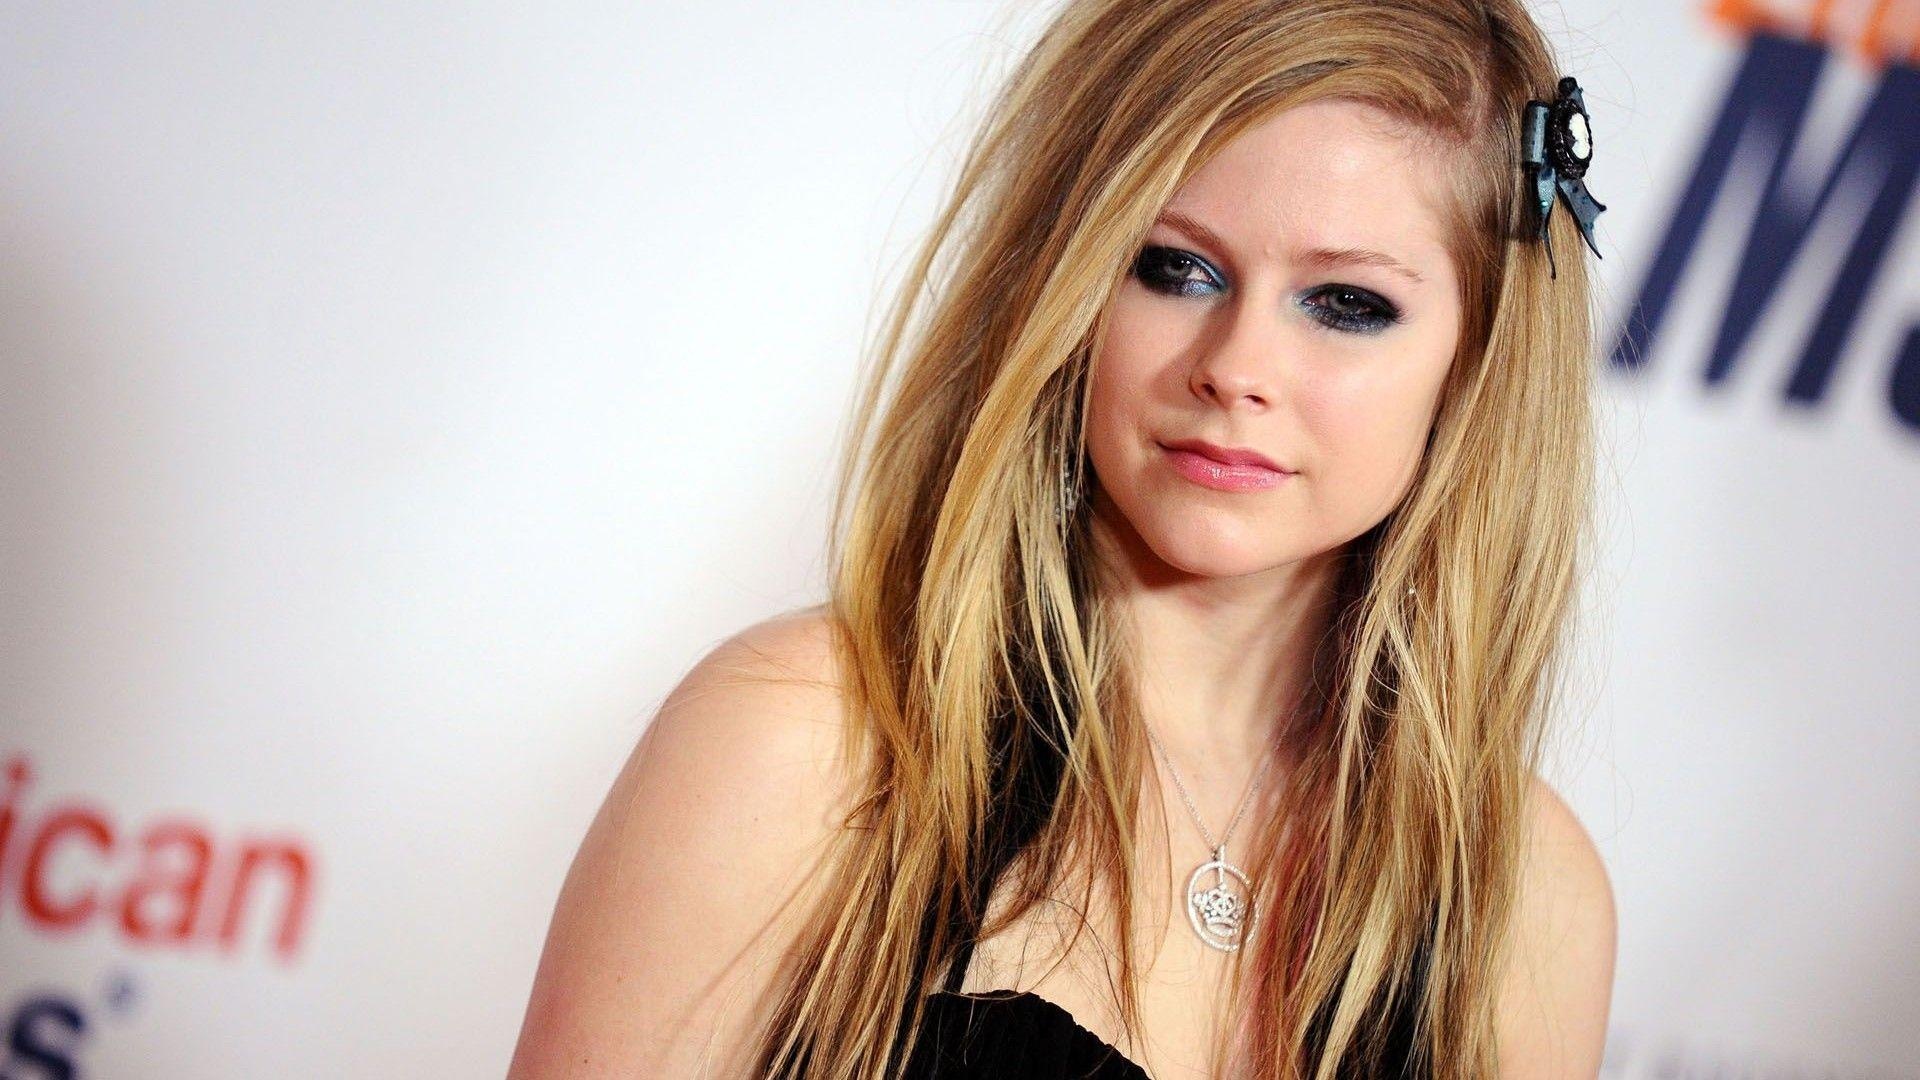 Avril Lavigne Wallpapers 1920x1080